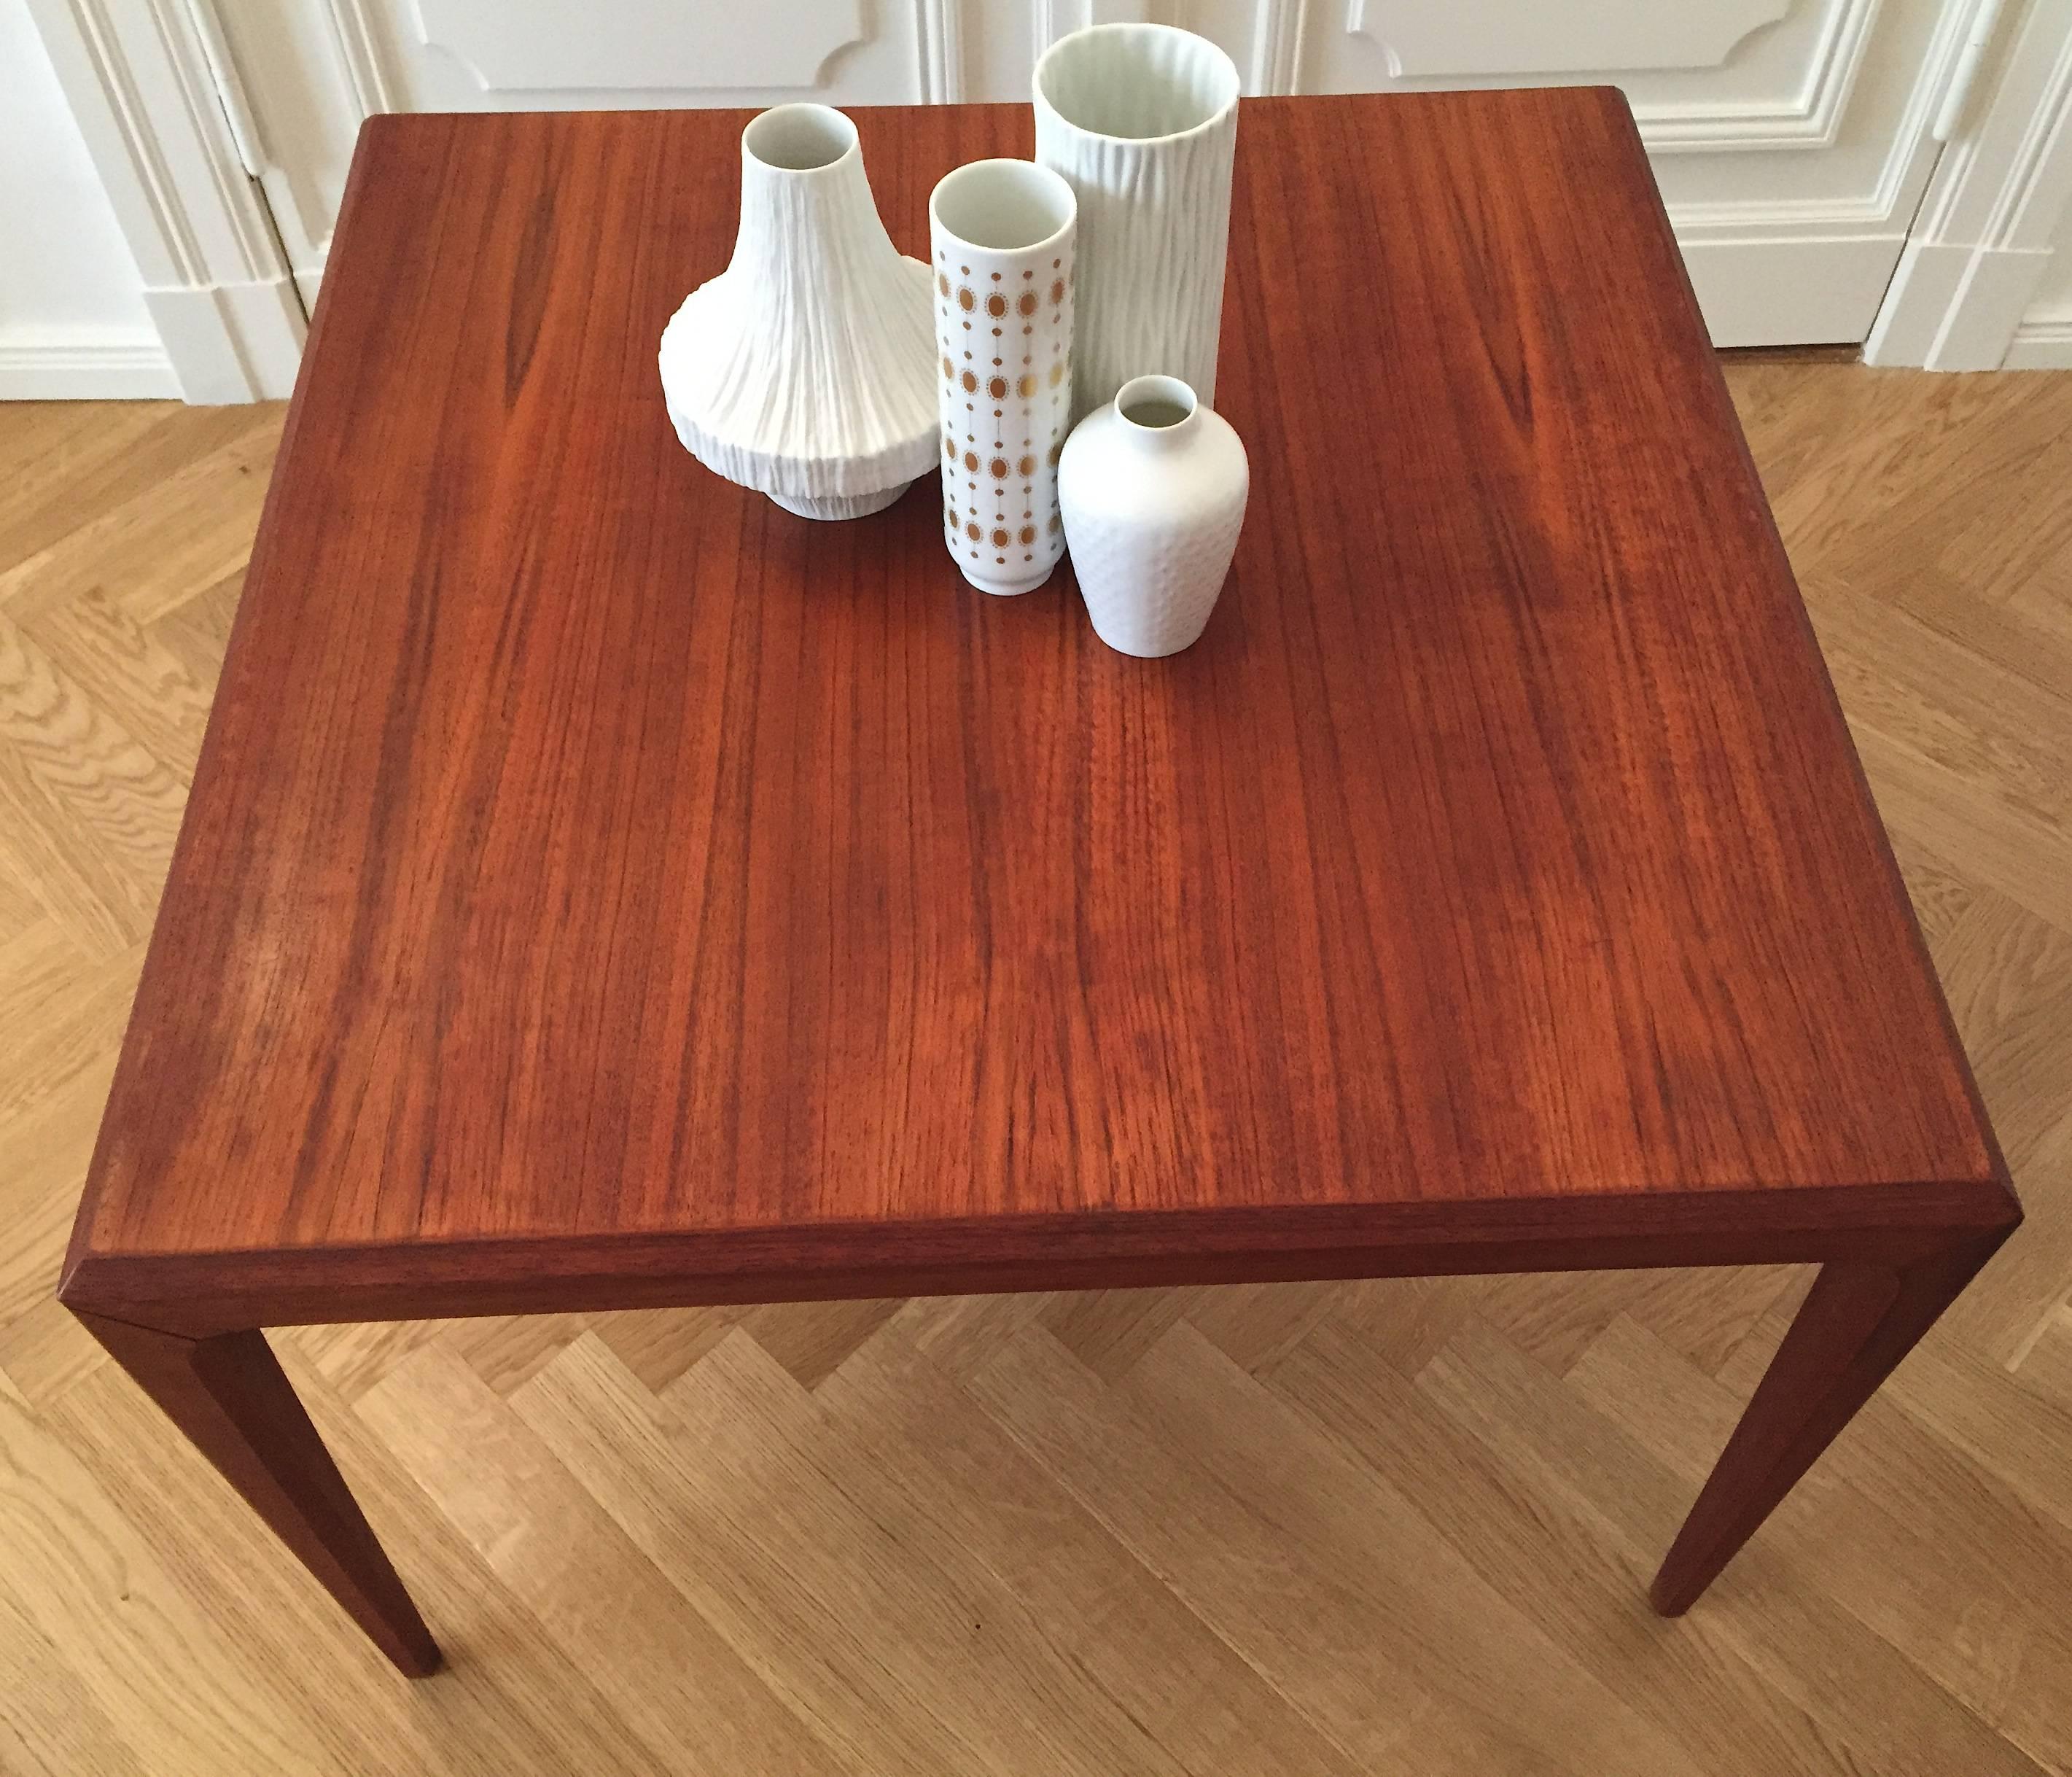 This cubic coffee table was designed by Johannes Andersen in the 1960s and has been manufactured by CFC Silkeborg in Denmark. It features a solid teak frame with a teak veneered tabletop. The top has slanted edges and the tapered legs can be